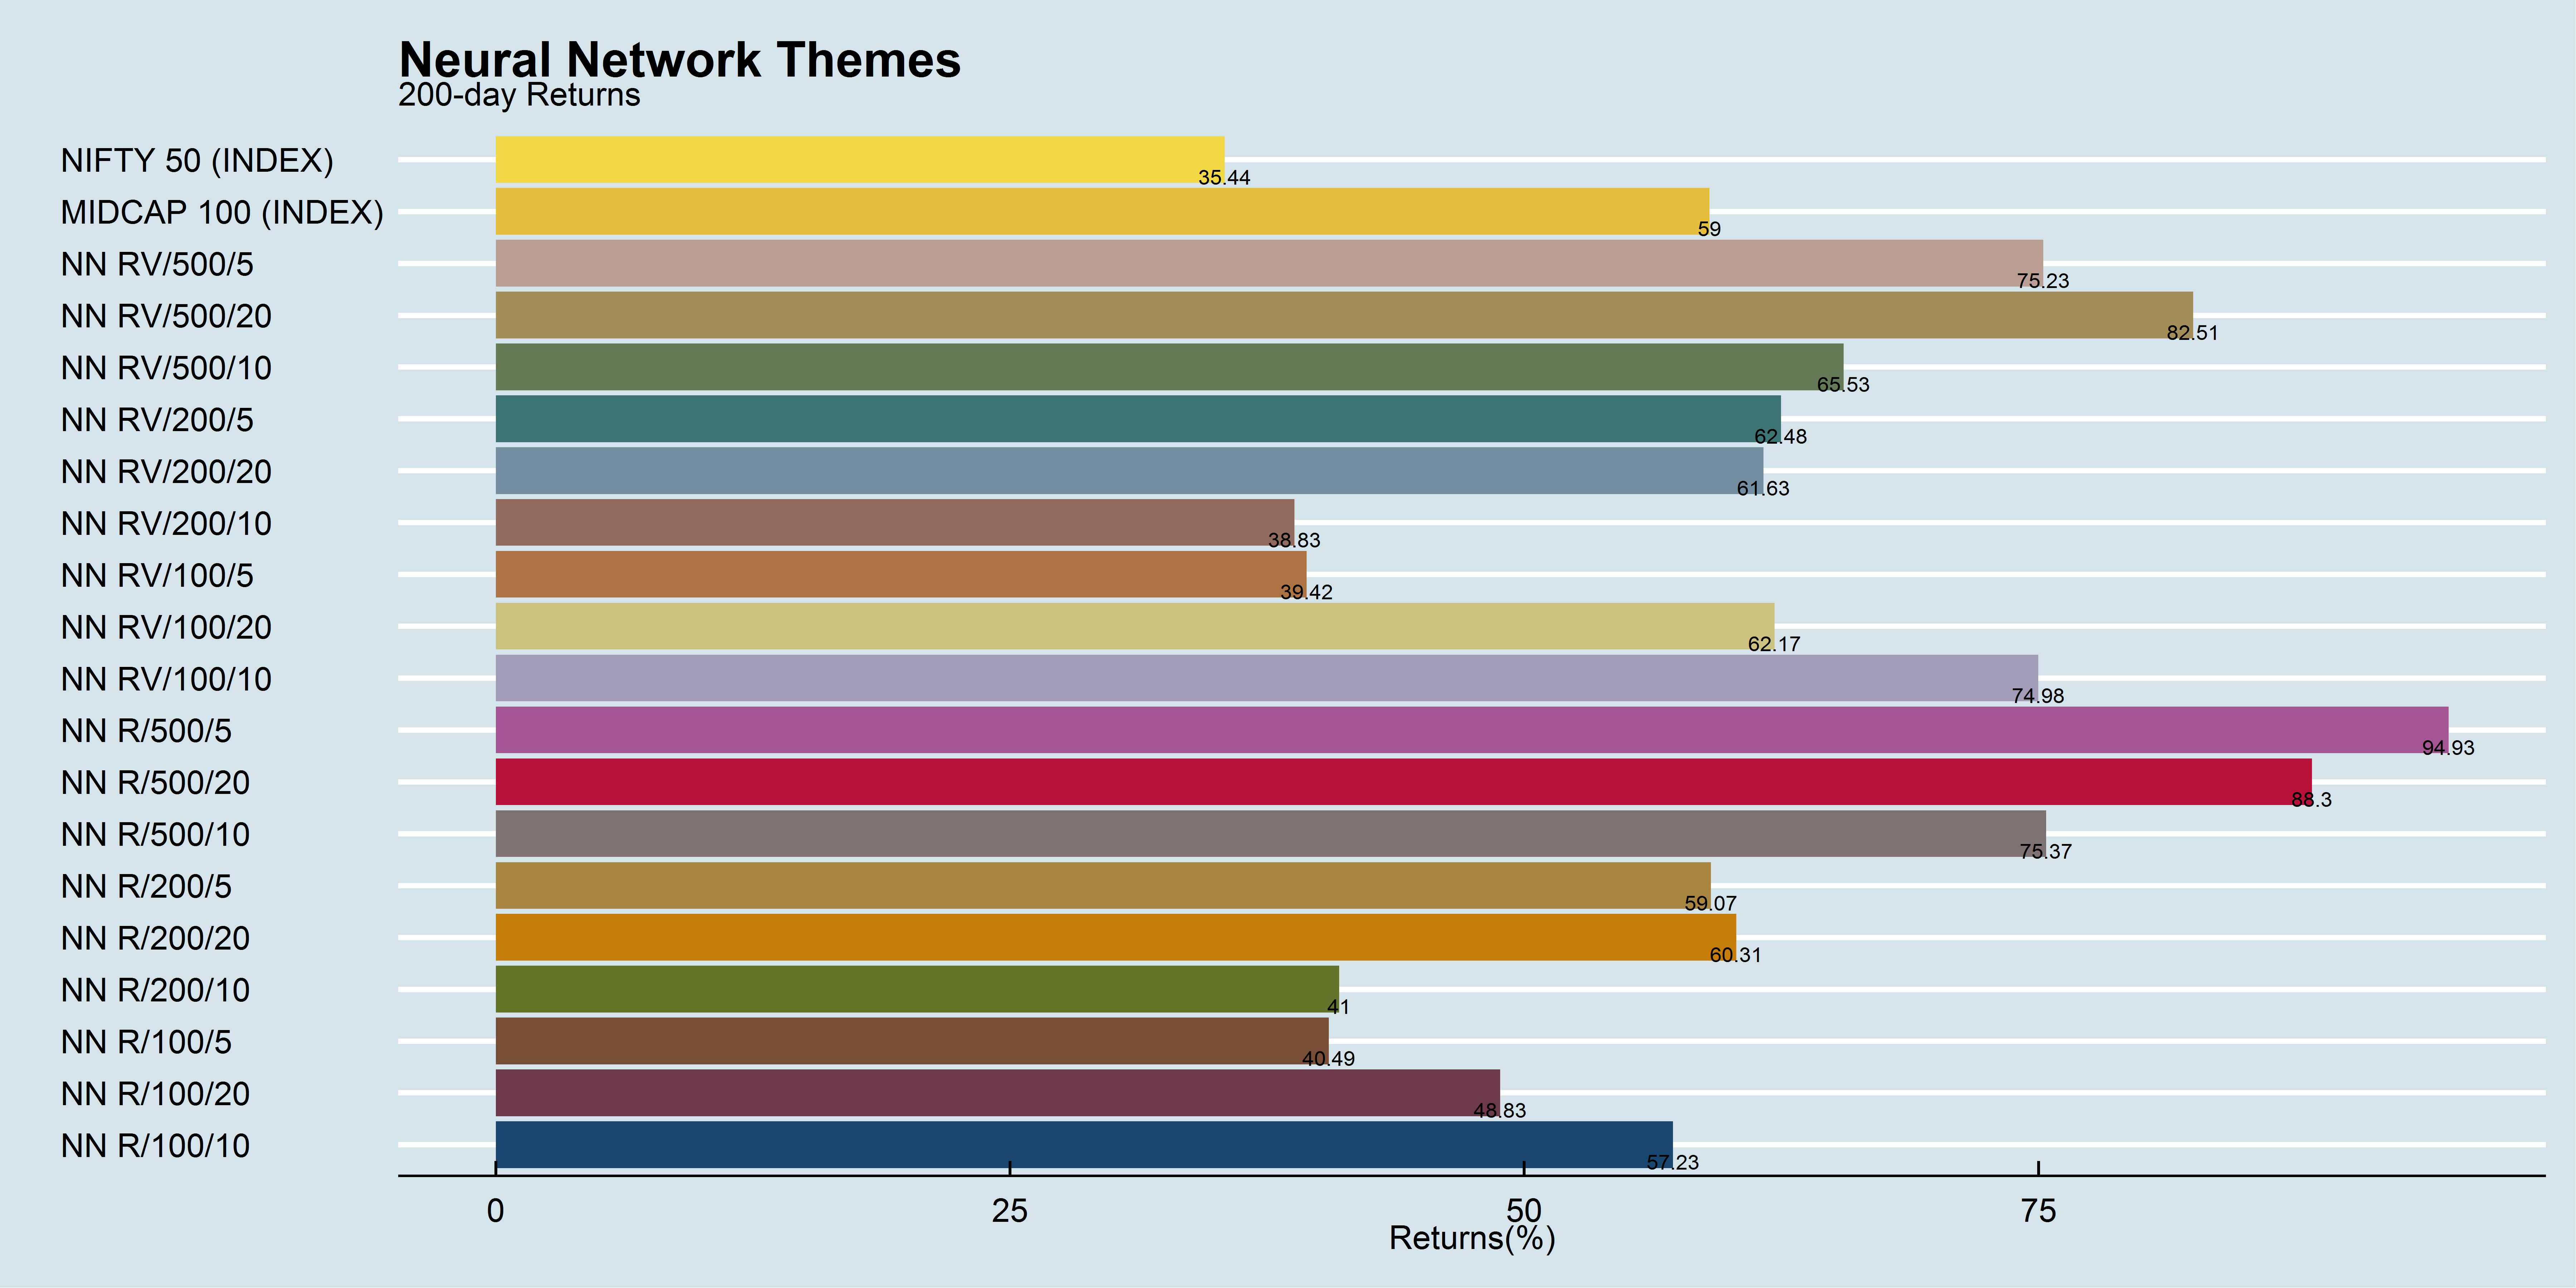 Neural Network Themes 200-day performance